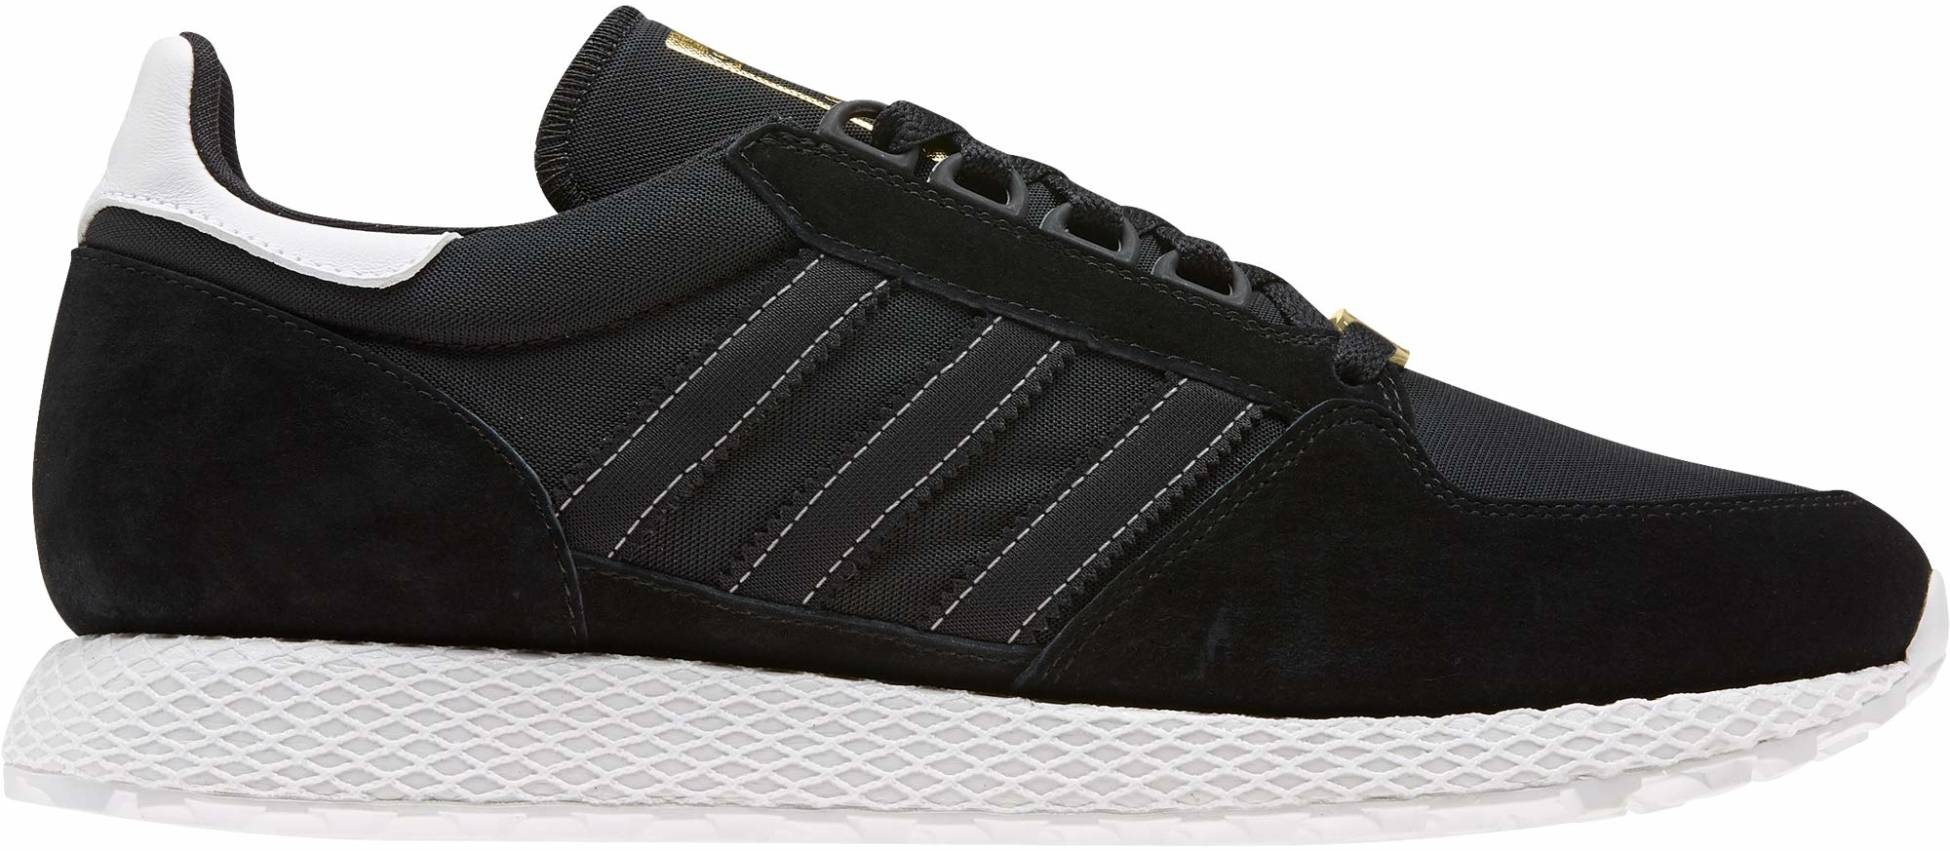 London Healthy Defeated Adidas Forest Grove sneakers in 5 colors (only $65) | RunRepeat